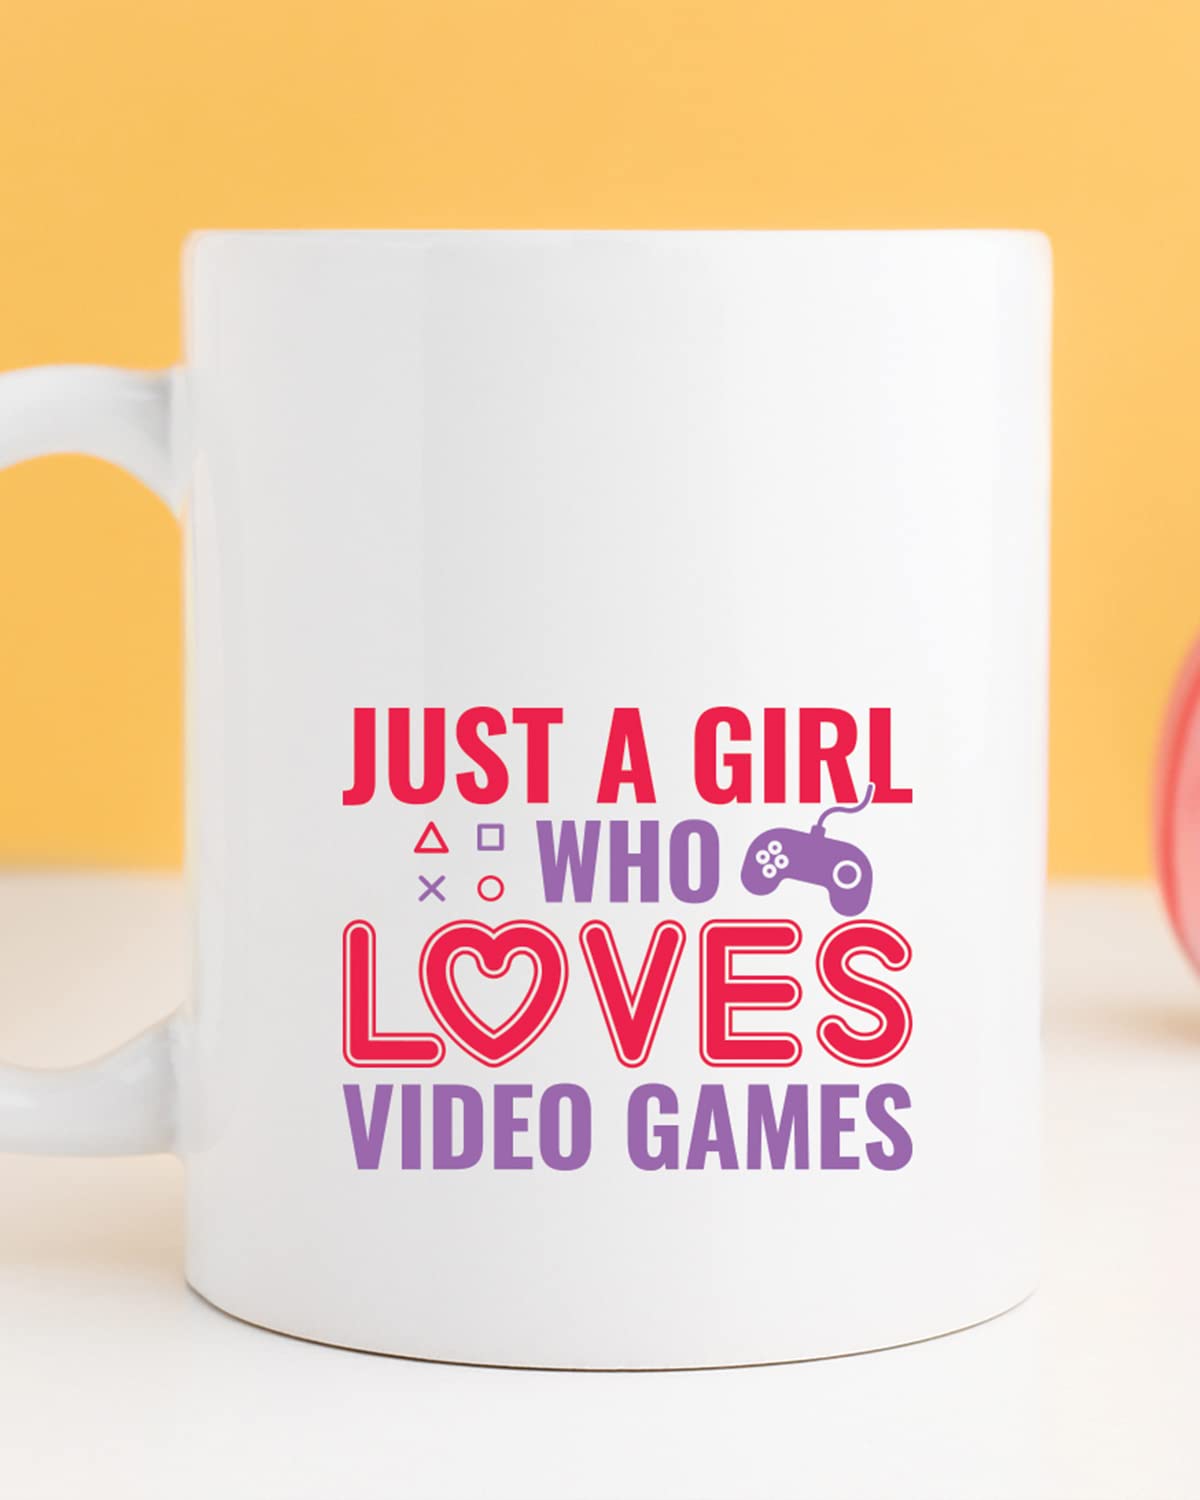 A GIRL WHO LOVES VIDEO GAMES Coffee Mug - Unique Gifts For Game Lovers, Gamer Mugs, Gifts For Gaming Coffee Cup for Husband Boyfriend Birthday, Valentine's Day Gift, Birthday Gift for gamer nerds